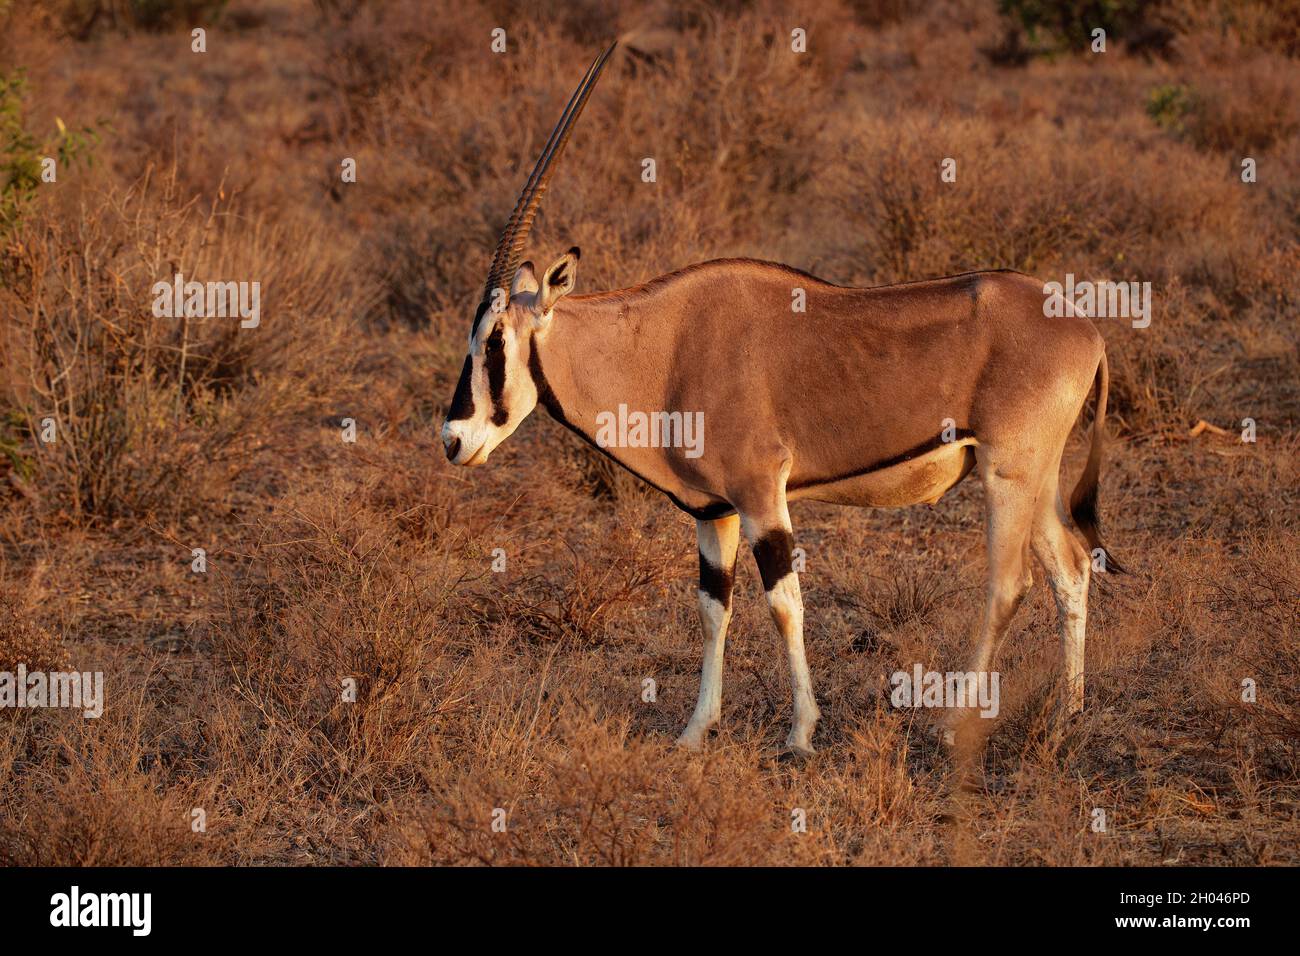 East African Oryx - Oryx beisa also Beisa, antelope from East Africa, found in steppe and semidesert throughout the Horn of Africa, two coloured, horn Stock Photo